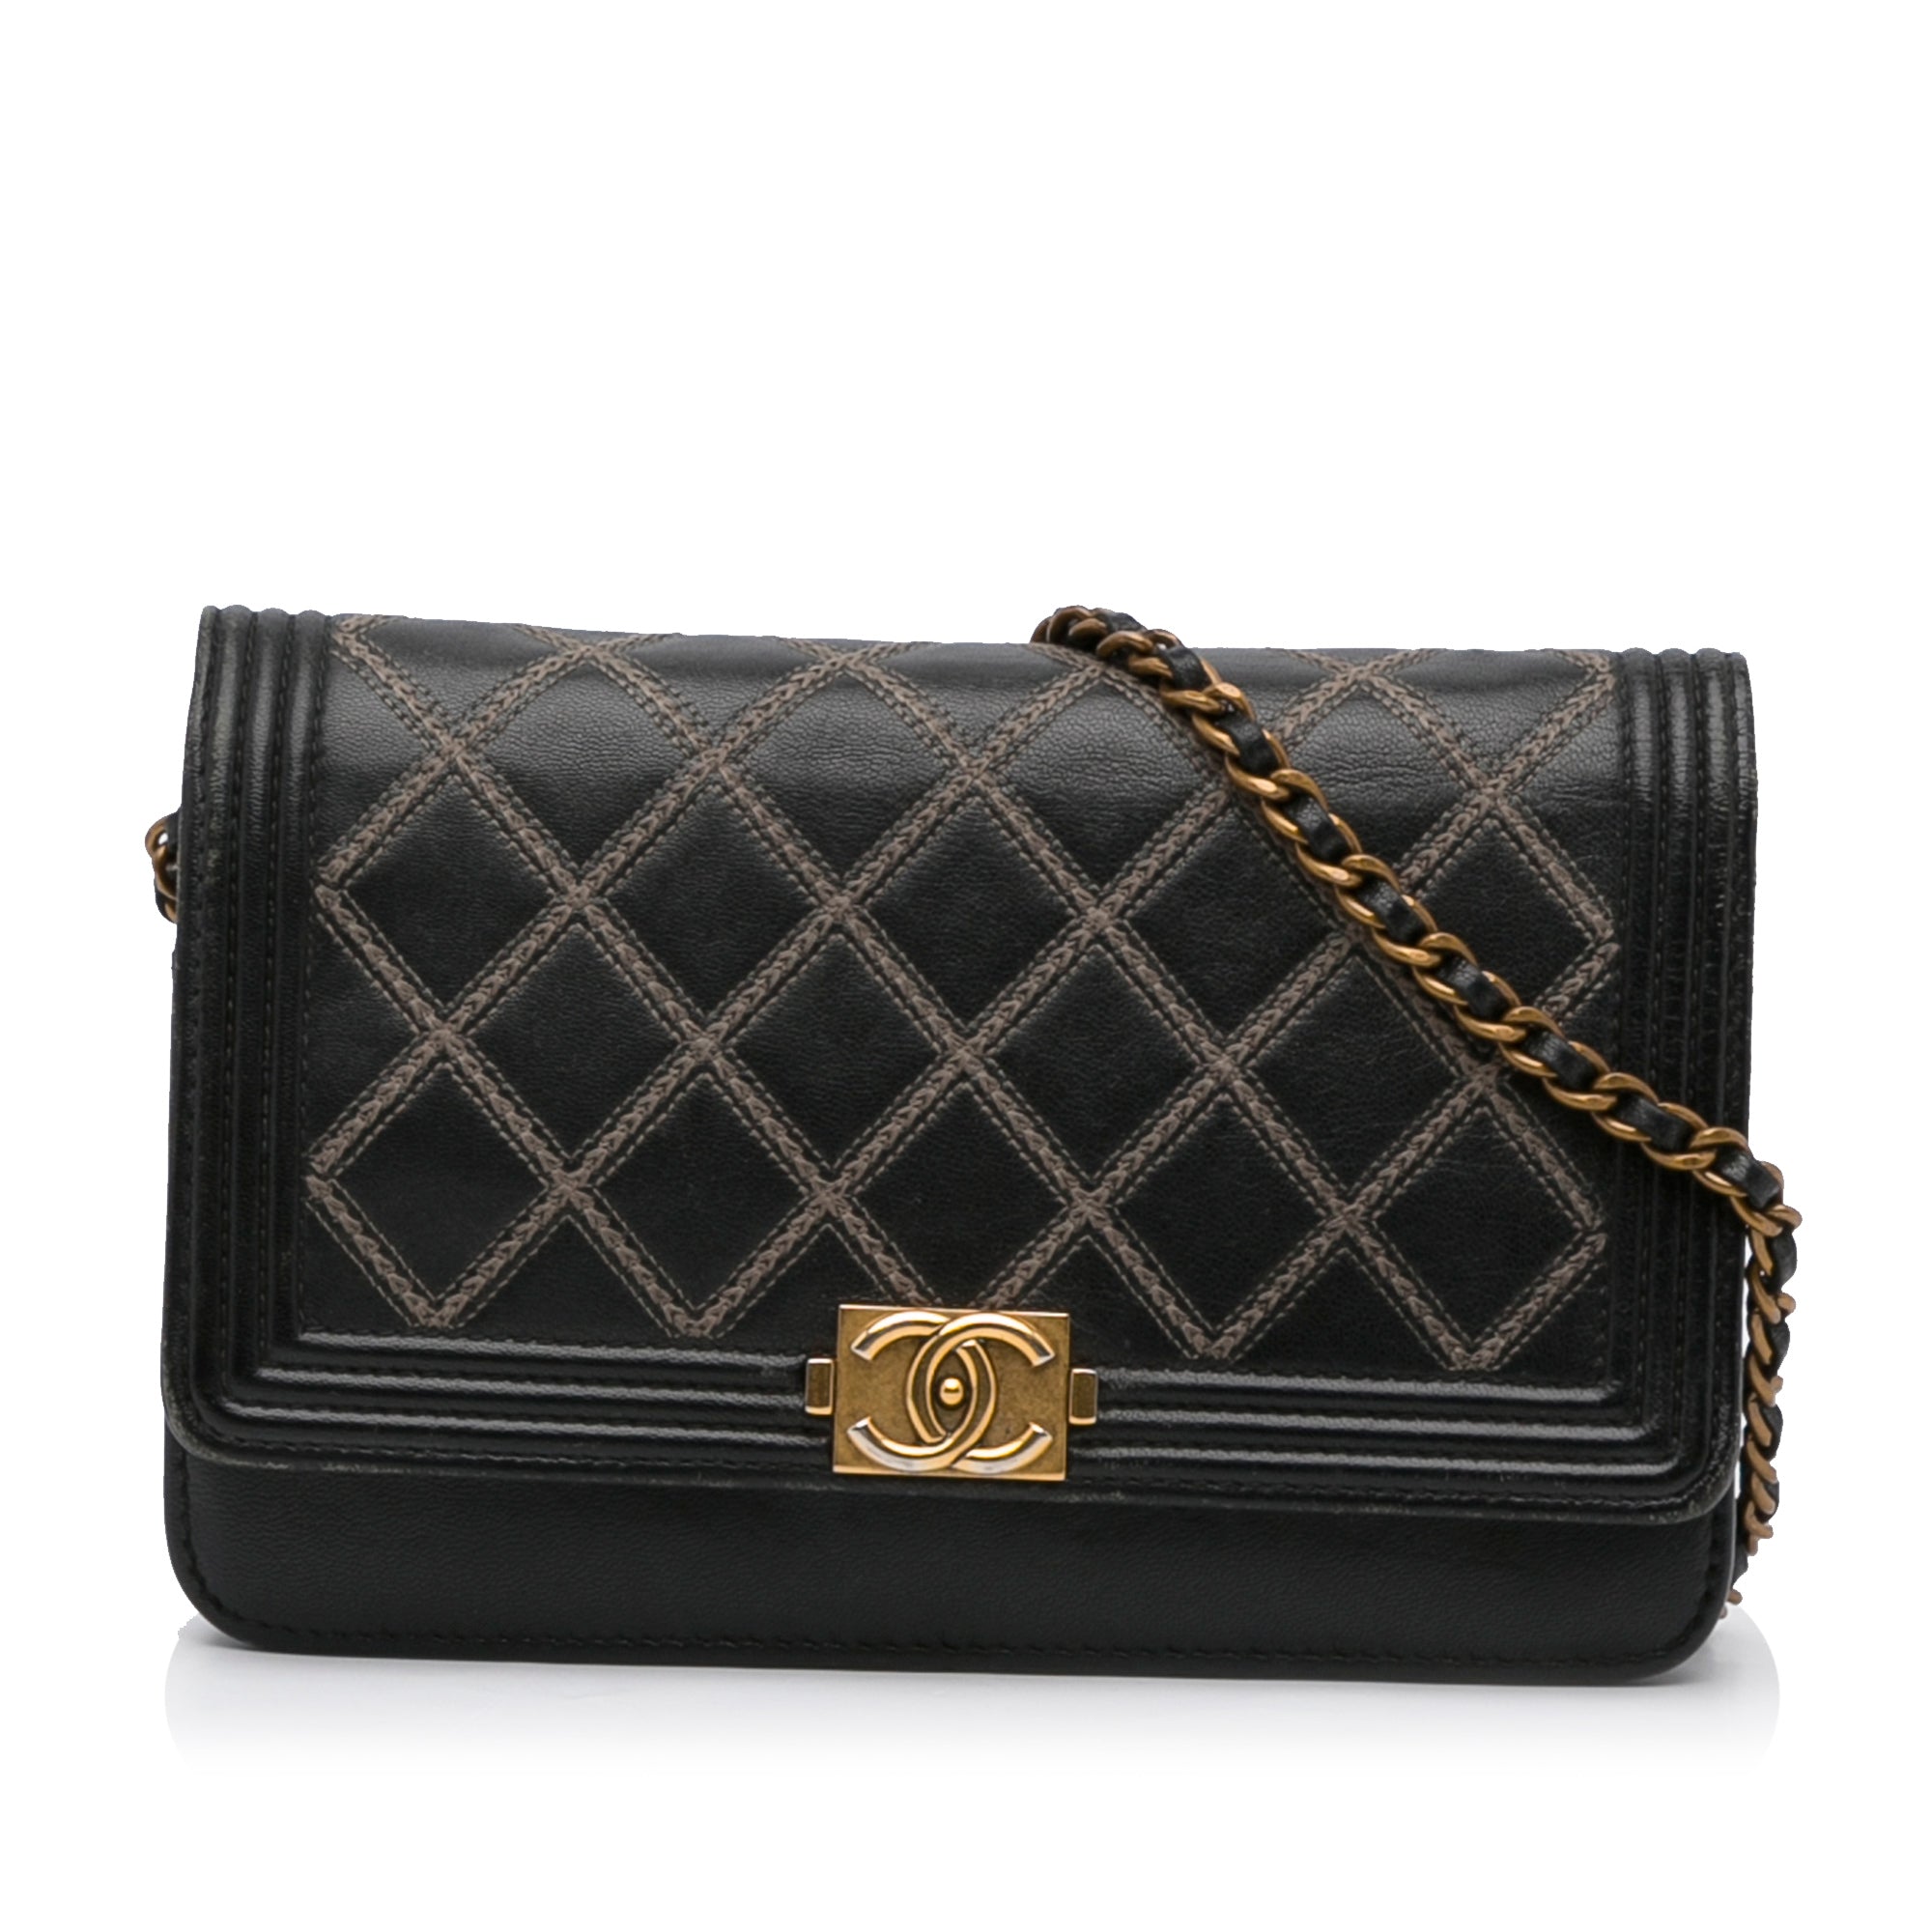 Black Chanel panache Quilted Boy Wallet On verniciata Crossbody Bag, RvceShops  Revival